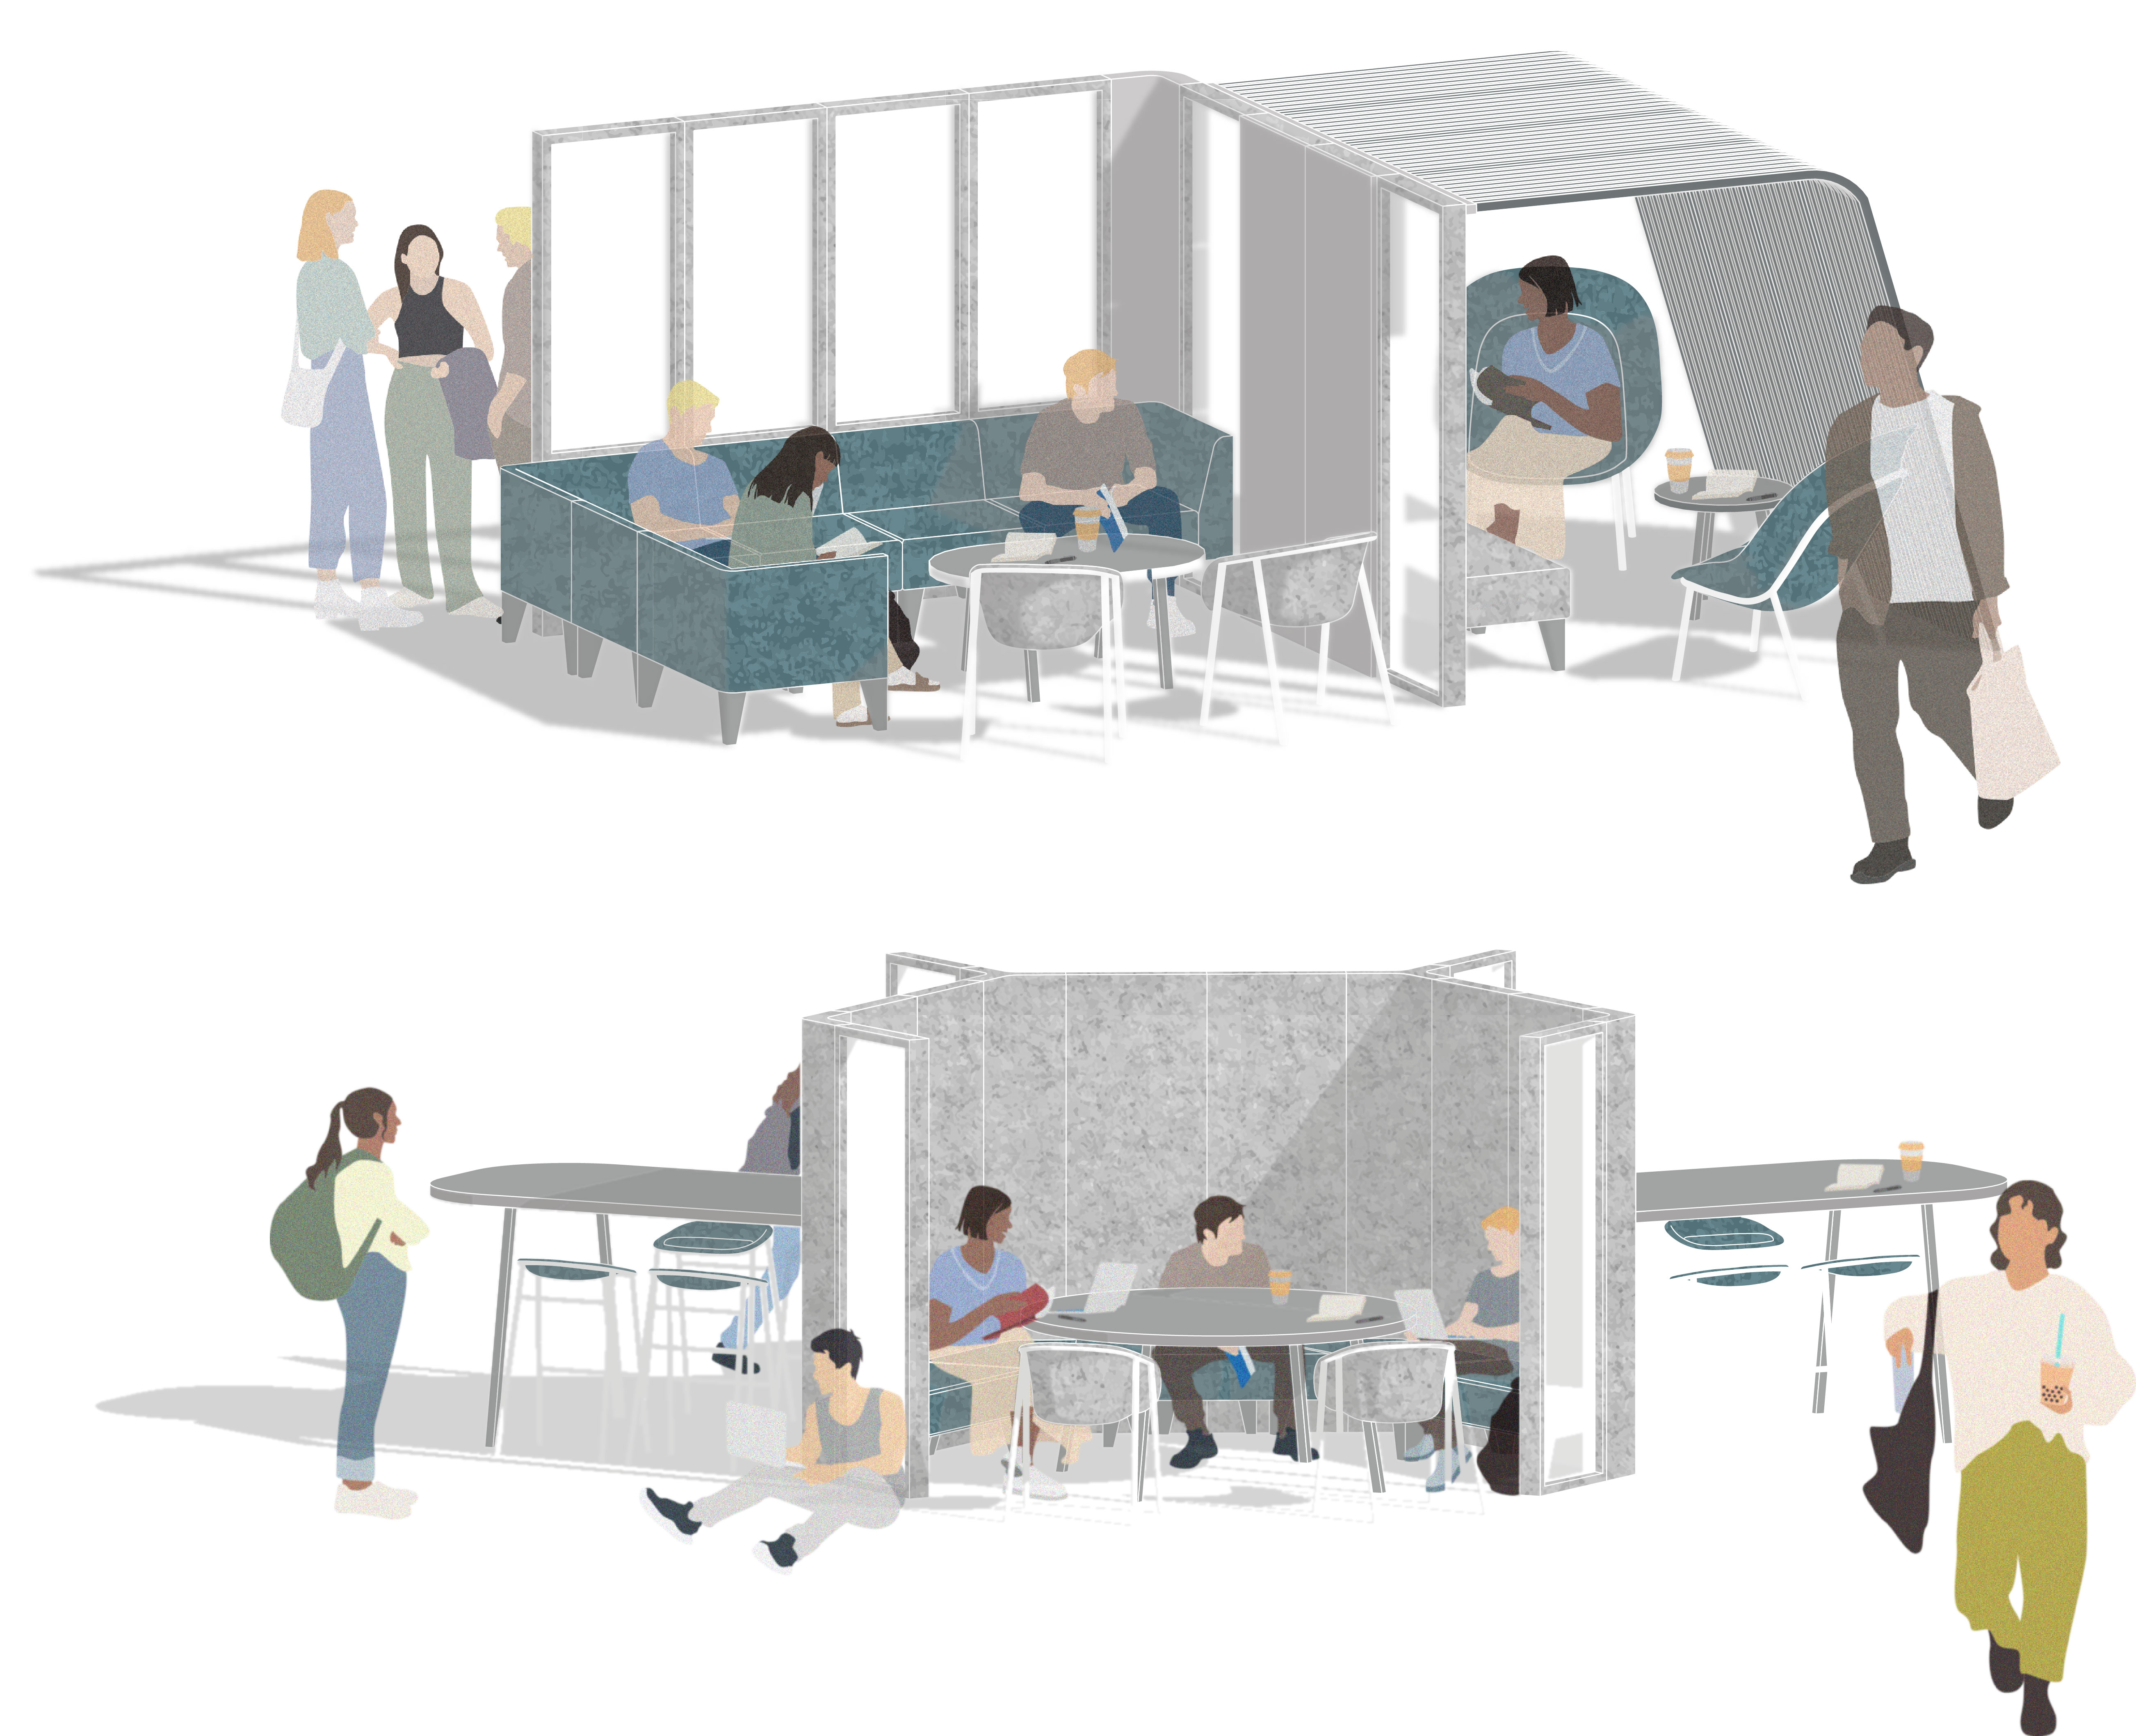 Two Illustrative renders of a modular furniture system in practice. Top render shows seating and private area and bottom render shows the desk spaces separated by divider.